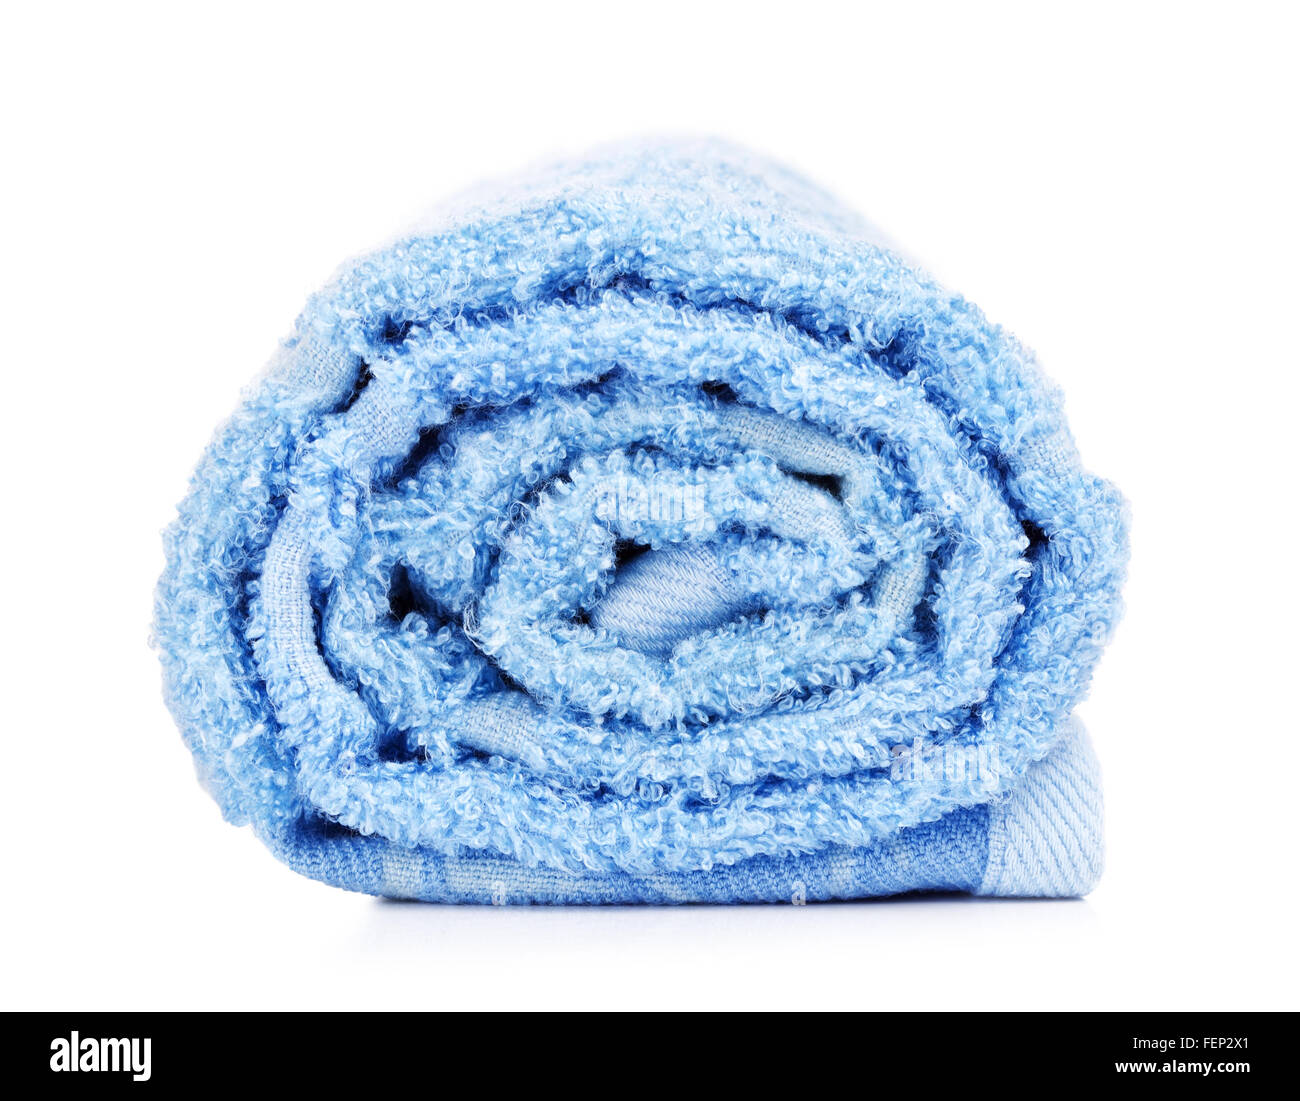 https://c8.alamy.com/comp/FEP2X1/rolled-up-blue-bath-towel-isolated-on-white-background-FEP2X1.jpg